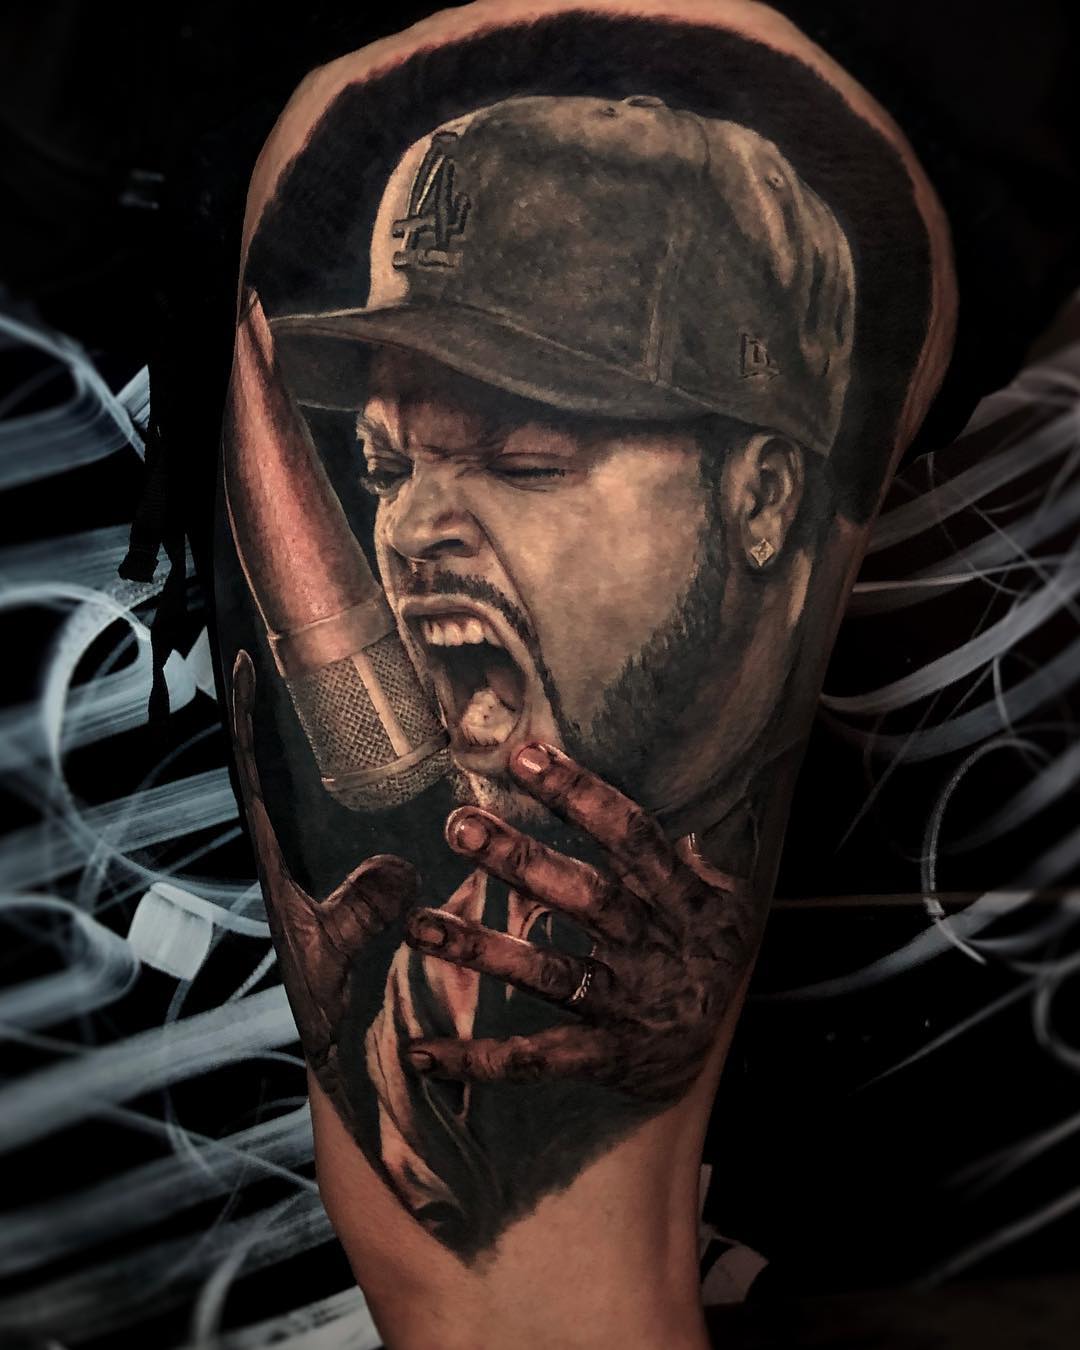 Black and grey Ice Cube portrait tattoo on the calf